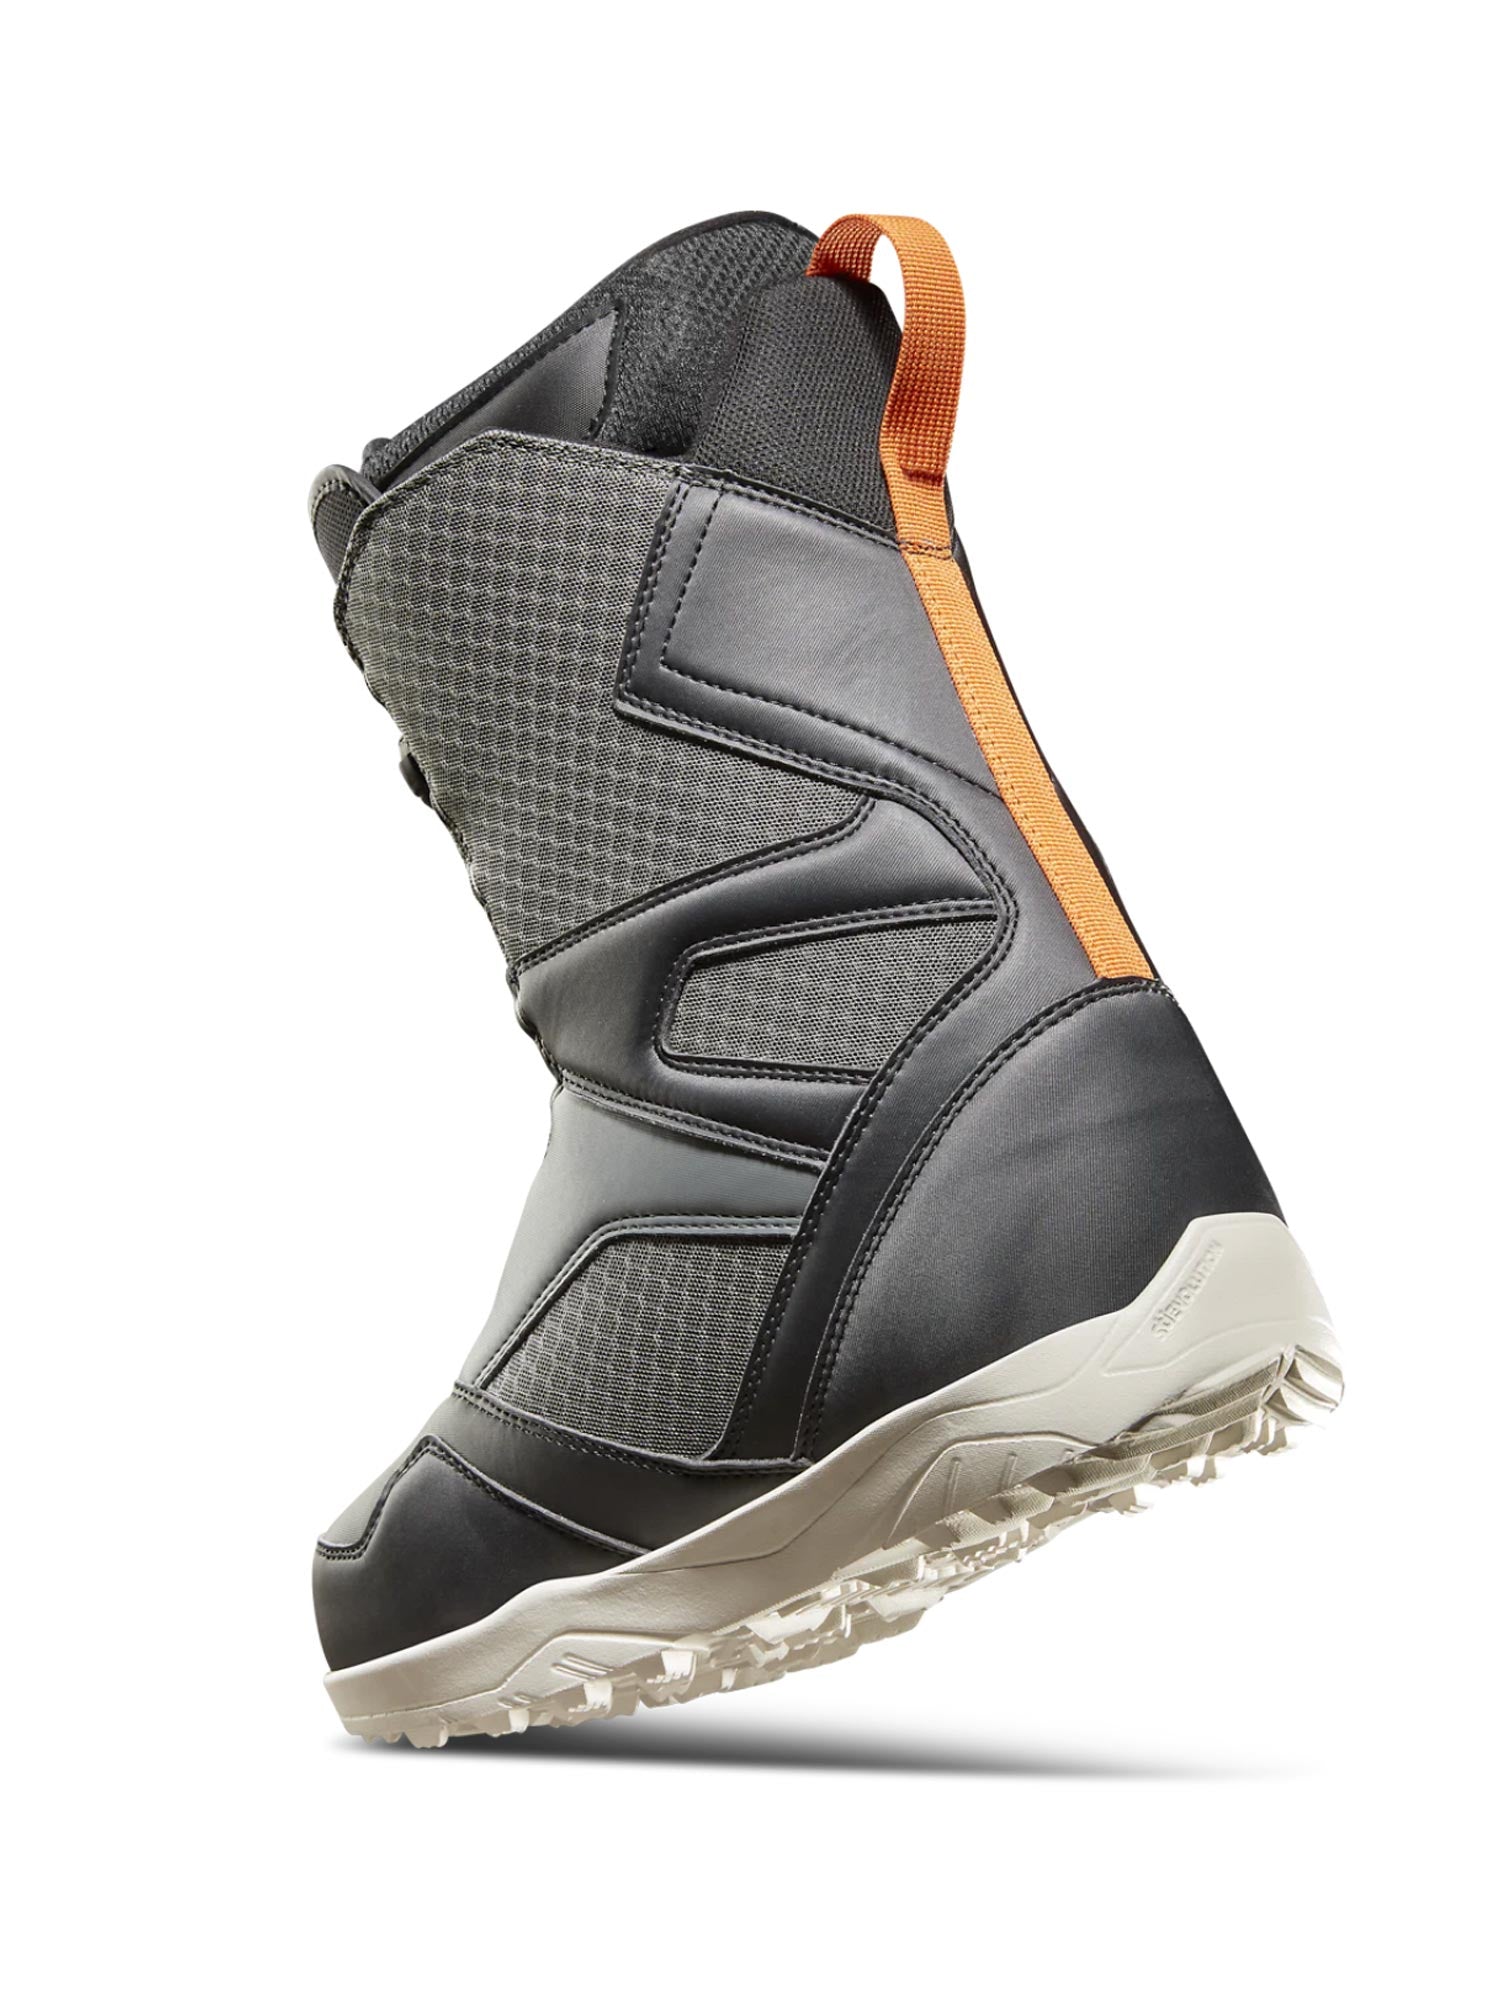 black and grey snowboard boots